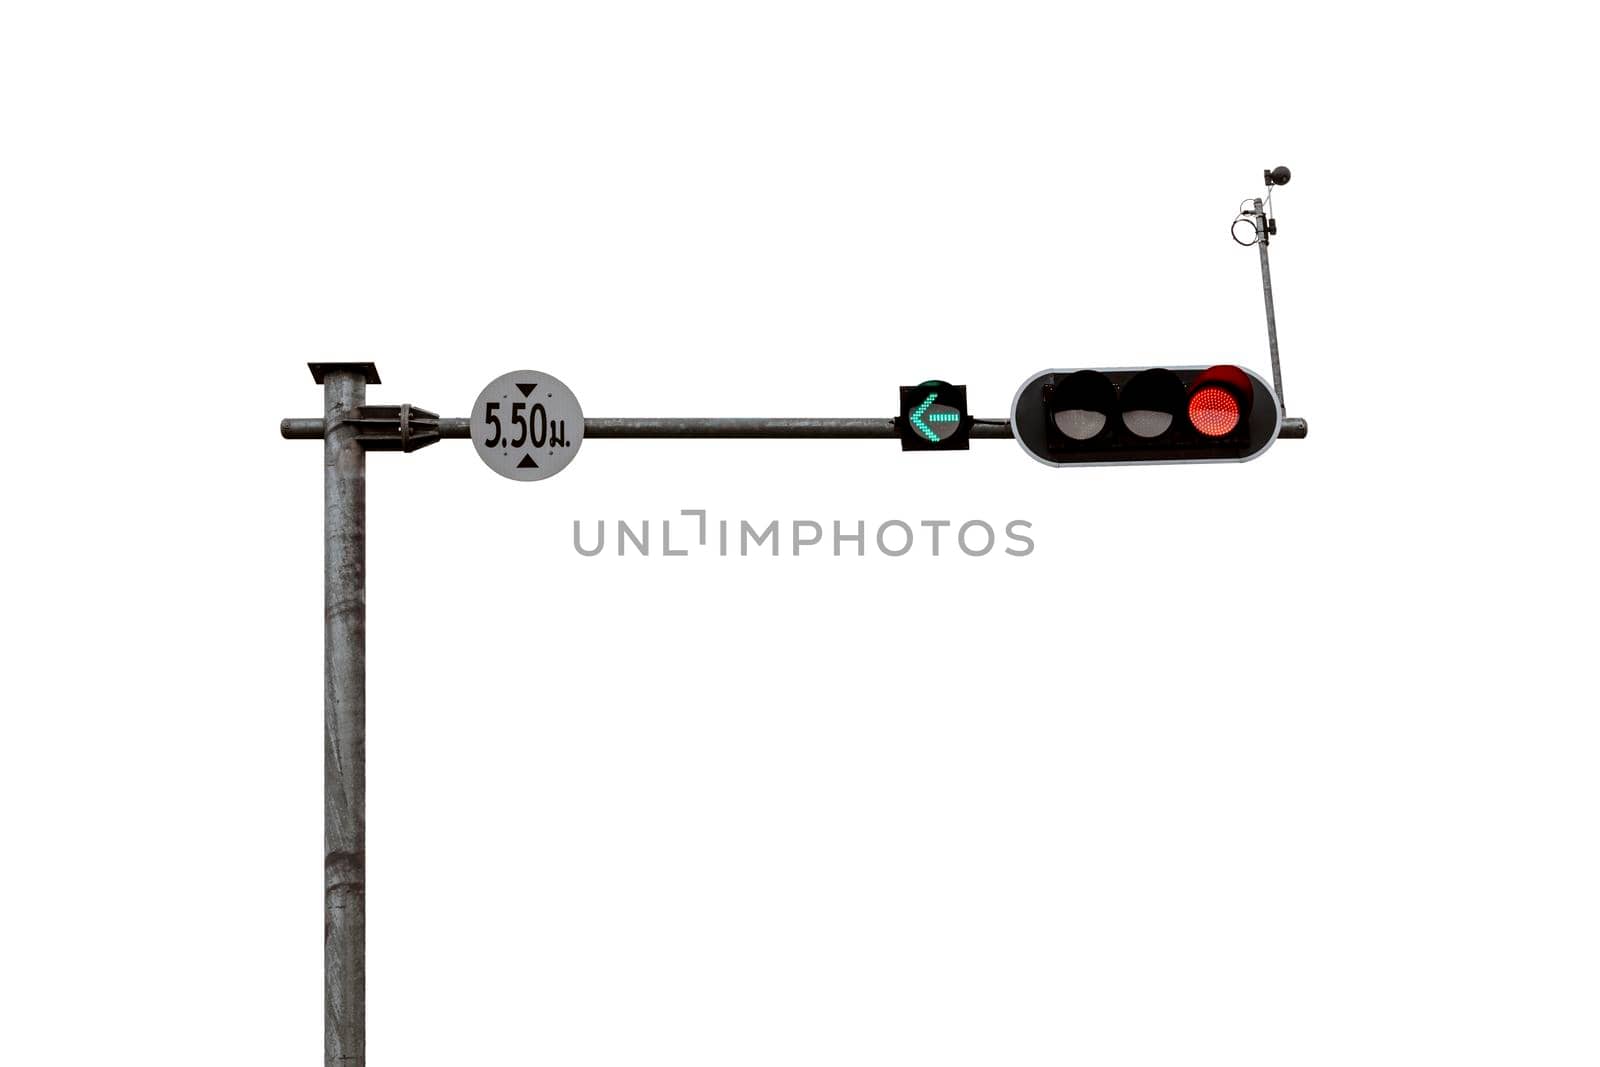 Traffic light pole showing the green light to turn left and the red light do not turn right. by wattanaphob